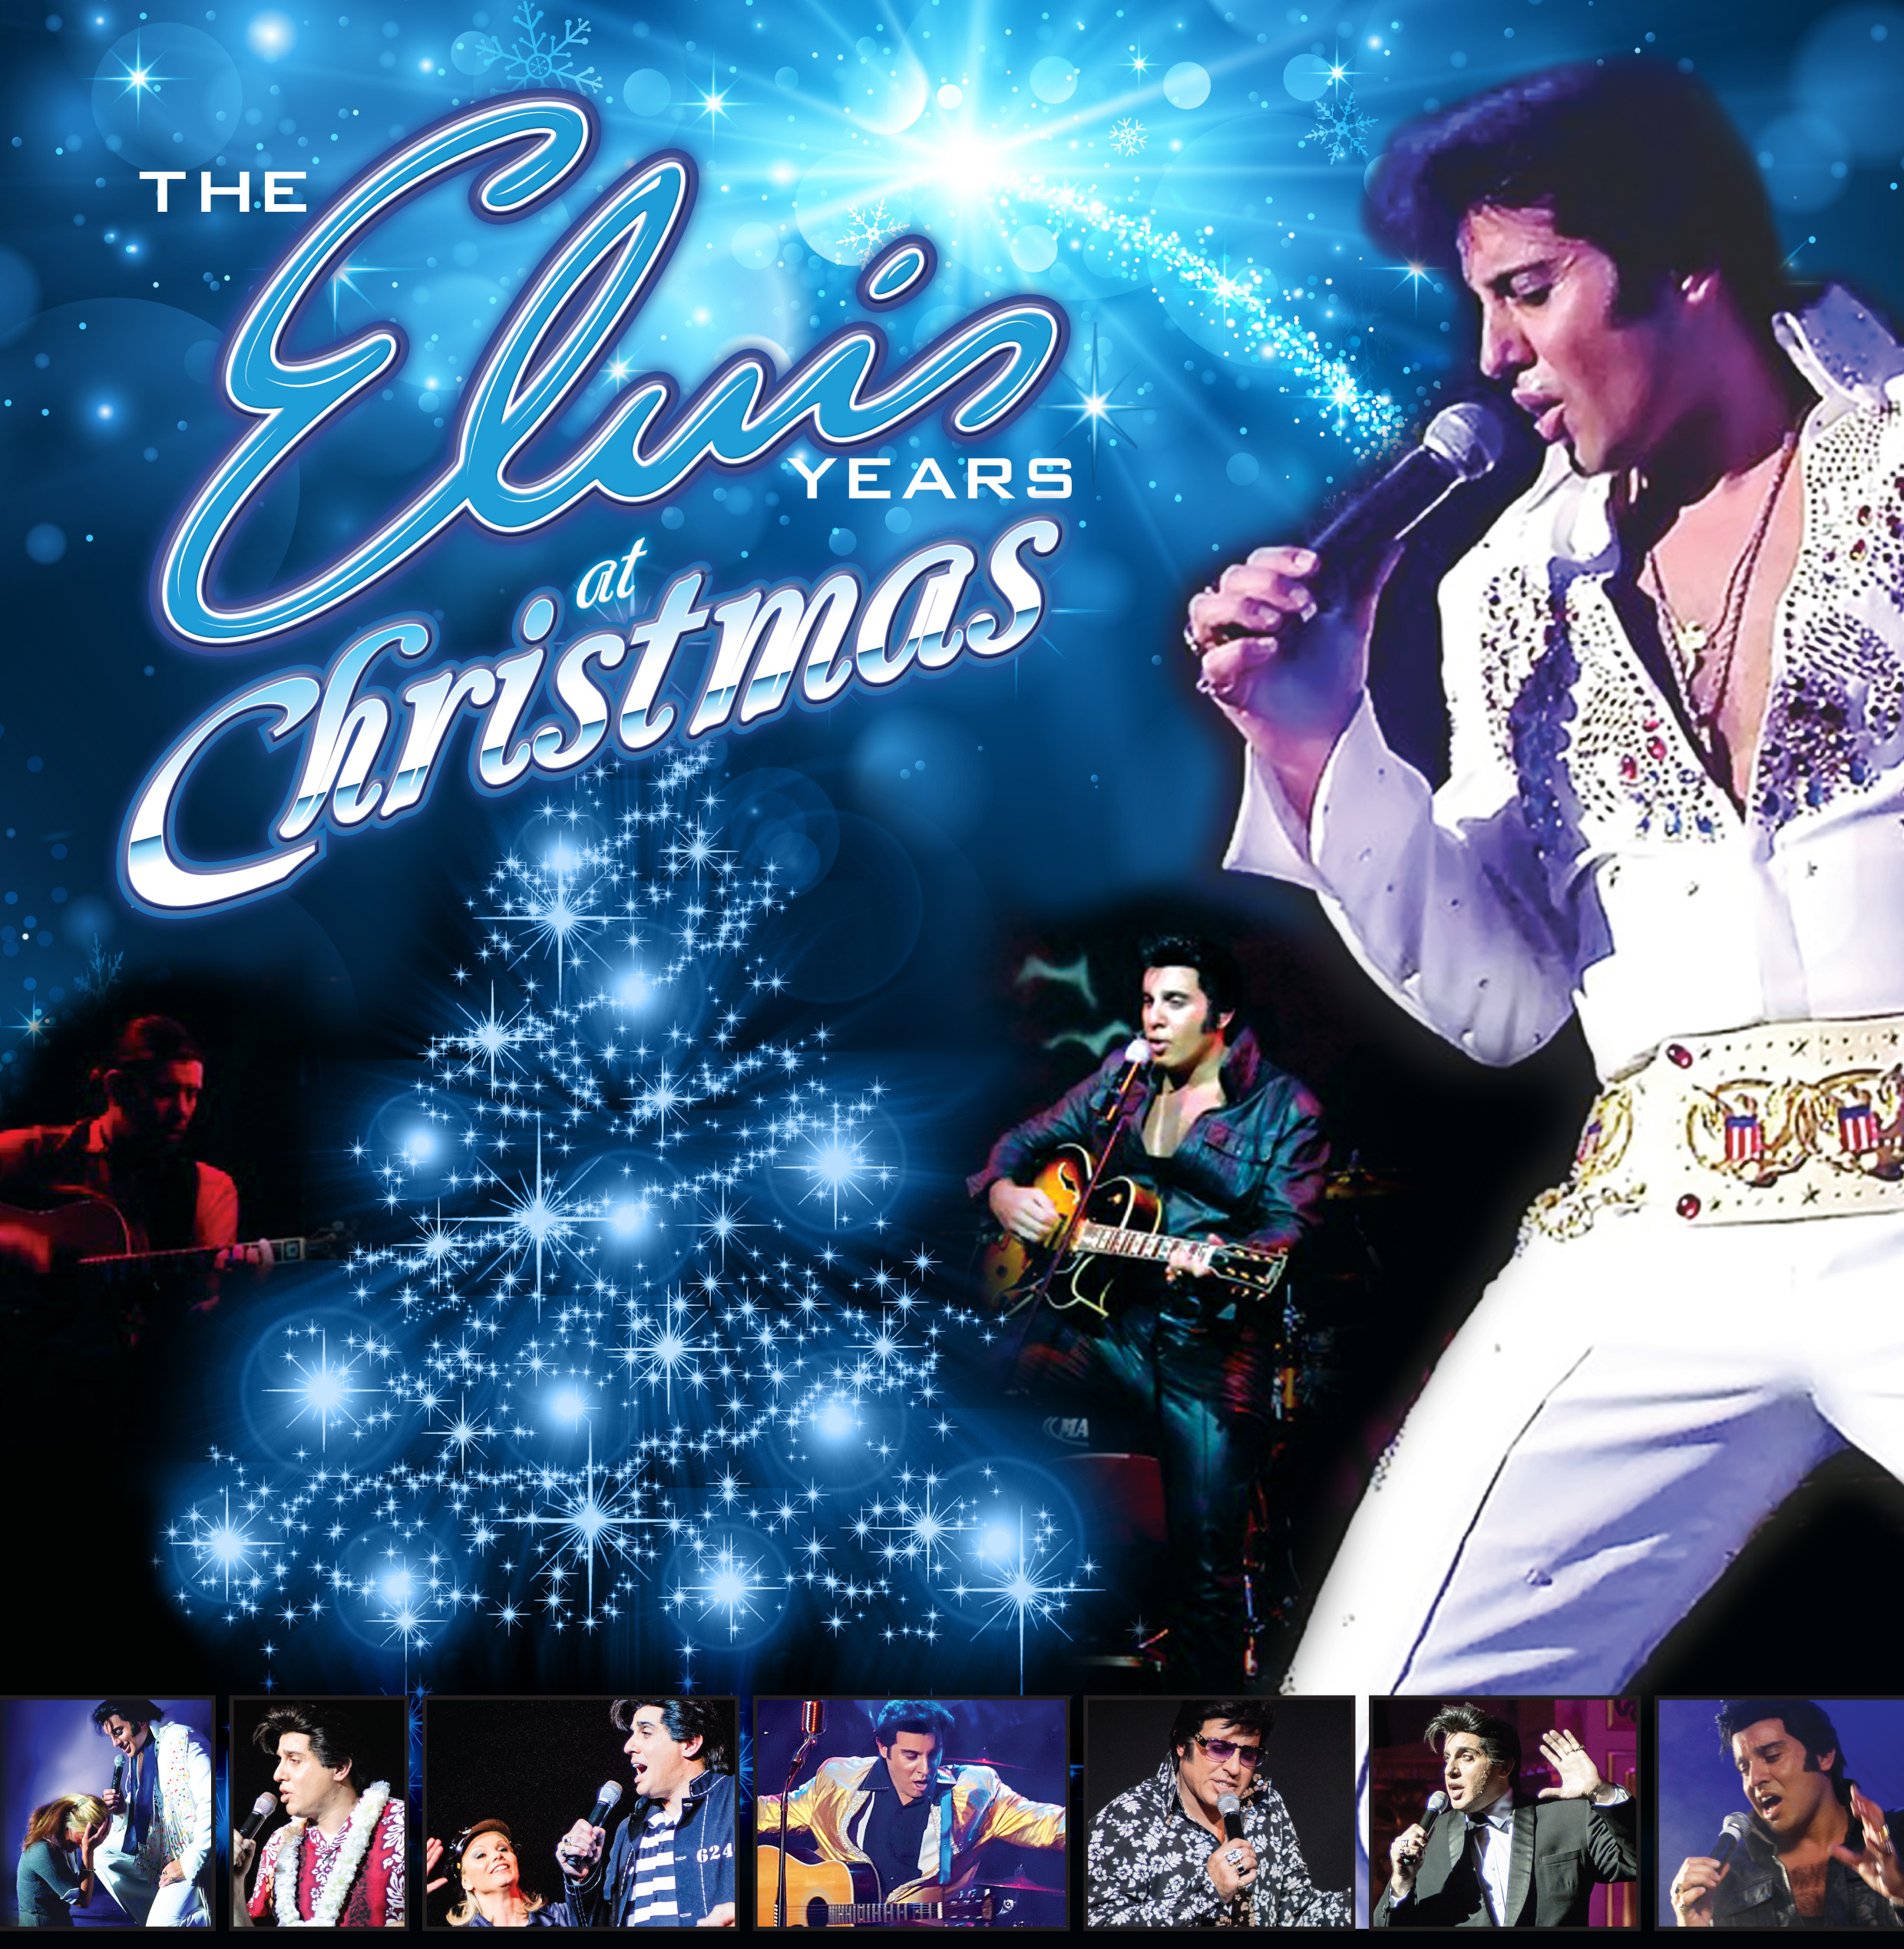 The Elvis Years at Christmas